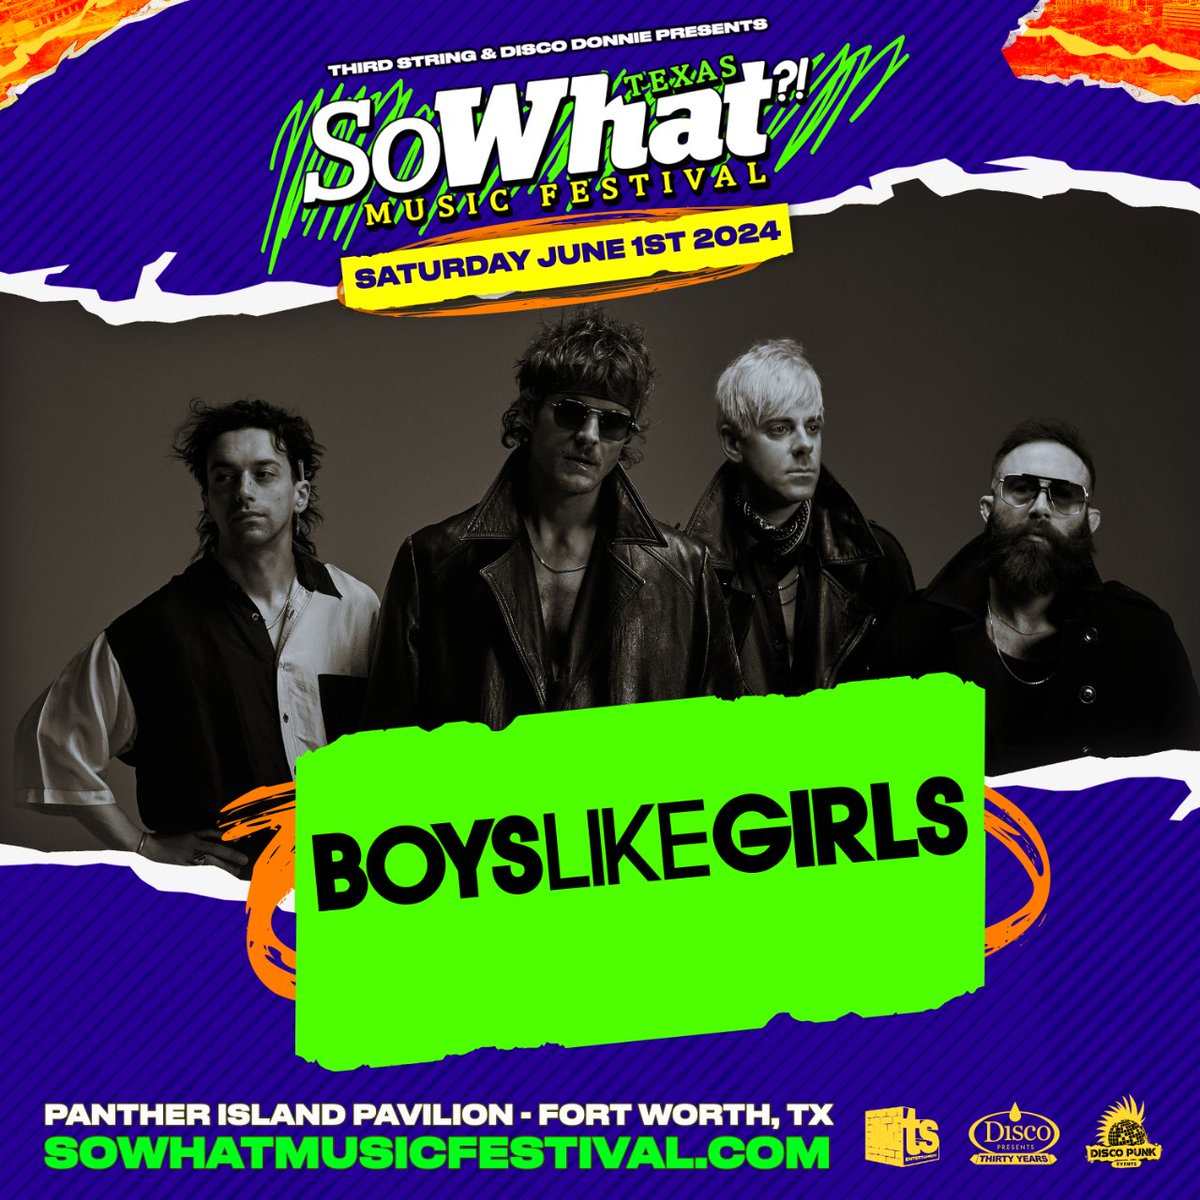 Maybe we'll see you in Fort Worth? Boys Like Girls joins us on June 1st at Panther Island Pavilion for an unforgettable night ❤️ sowhatmusicfestival.com